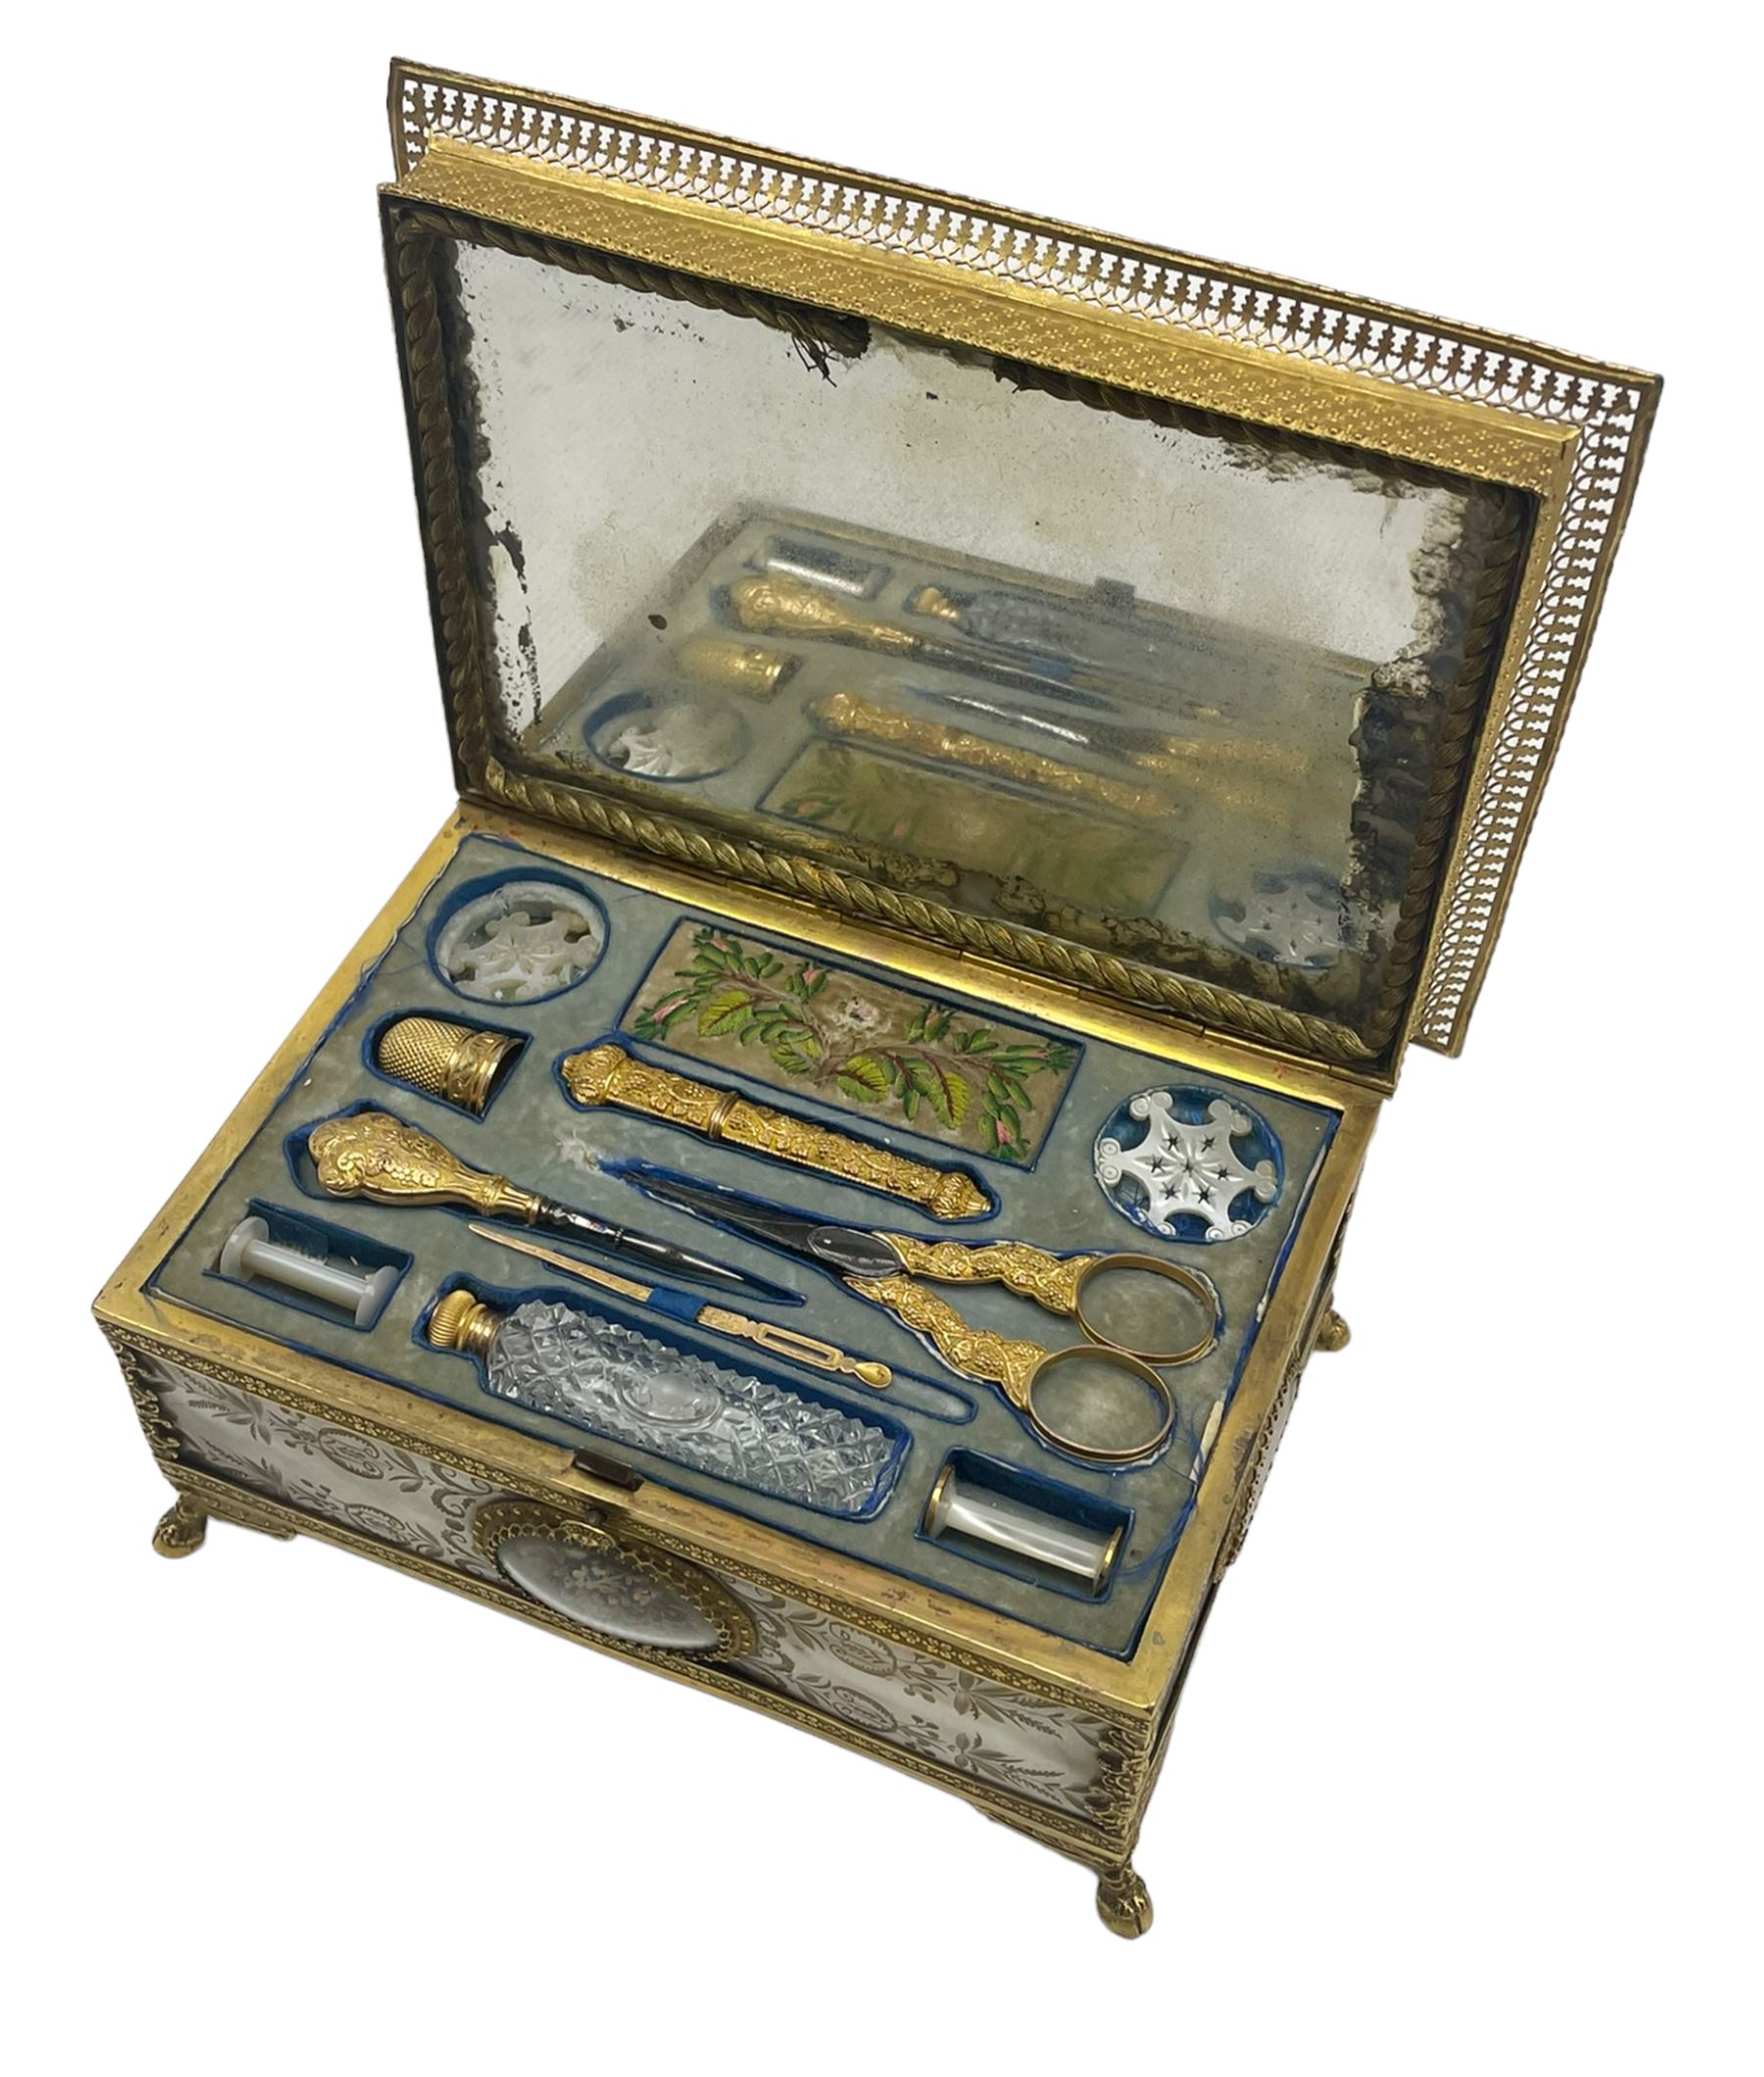 Early 19th century French Palais Royal type ormolu and mother-of-pearl musical sewing etui - Image 2 of 19